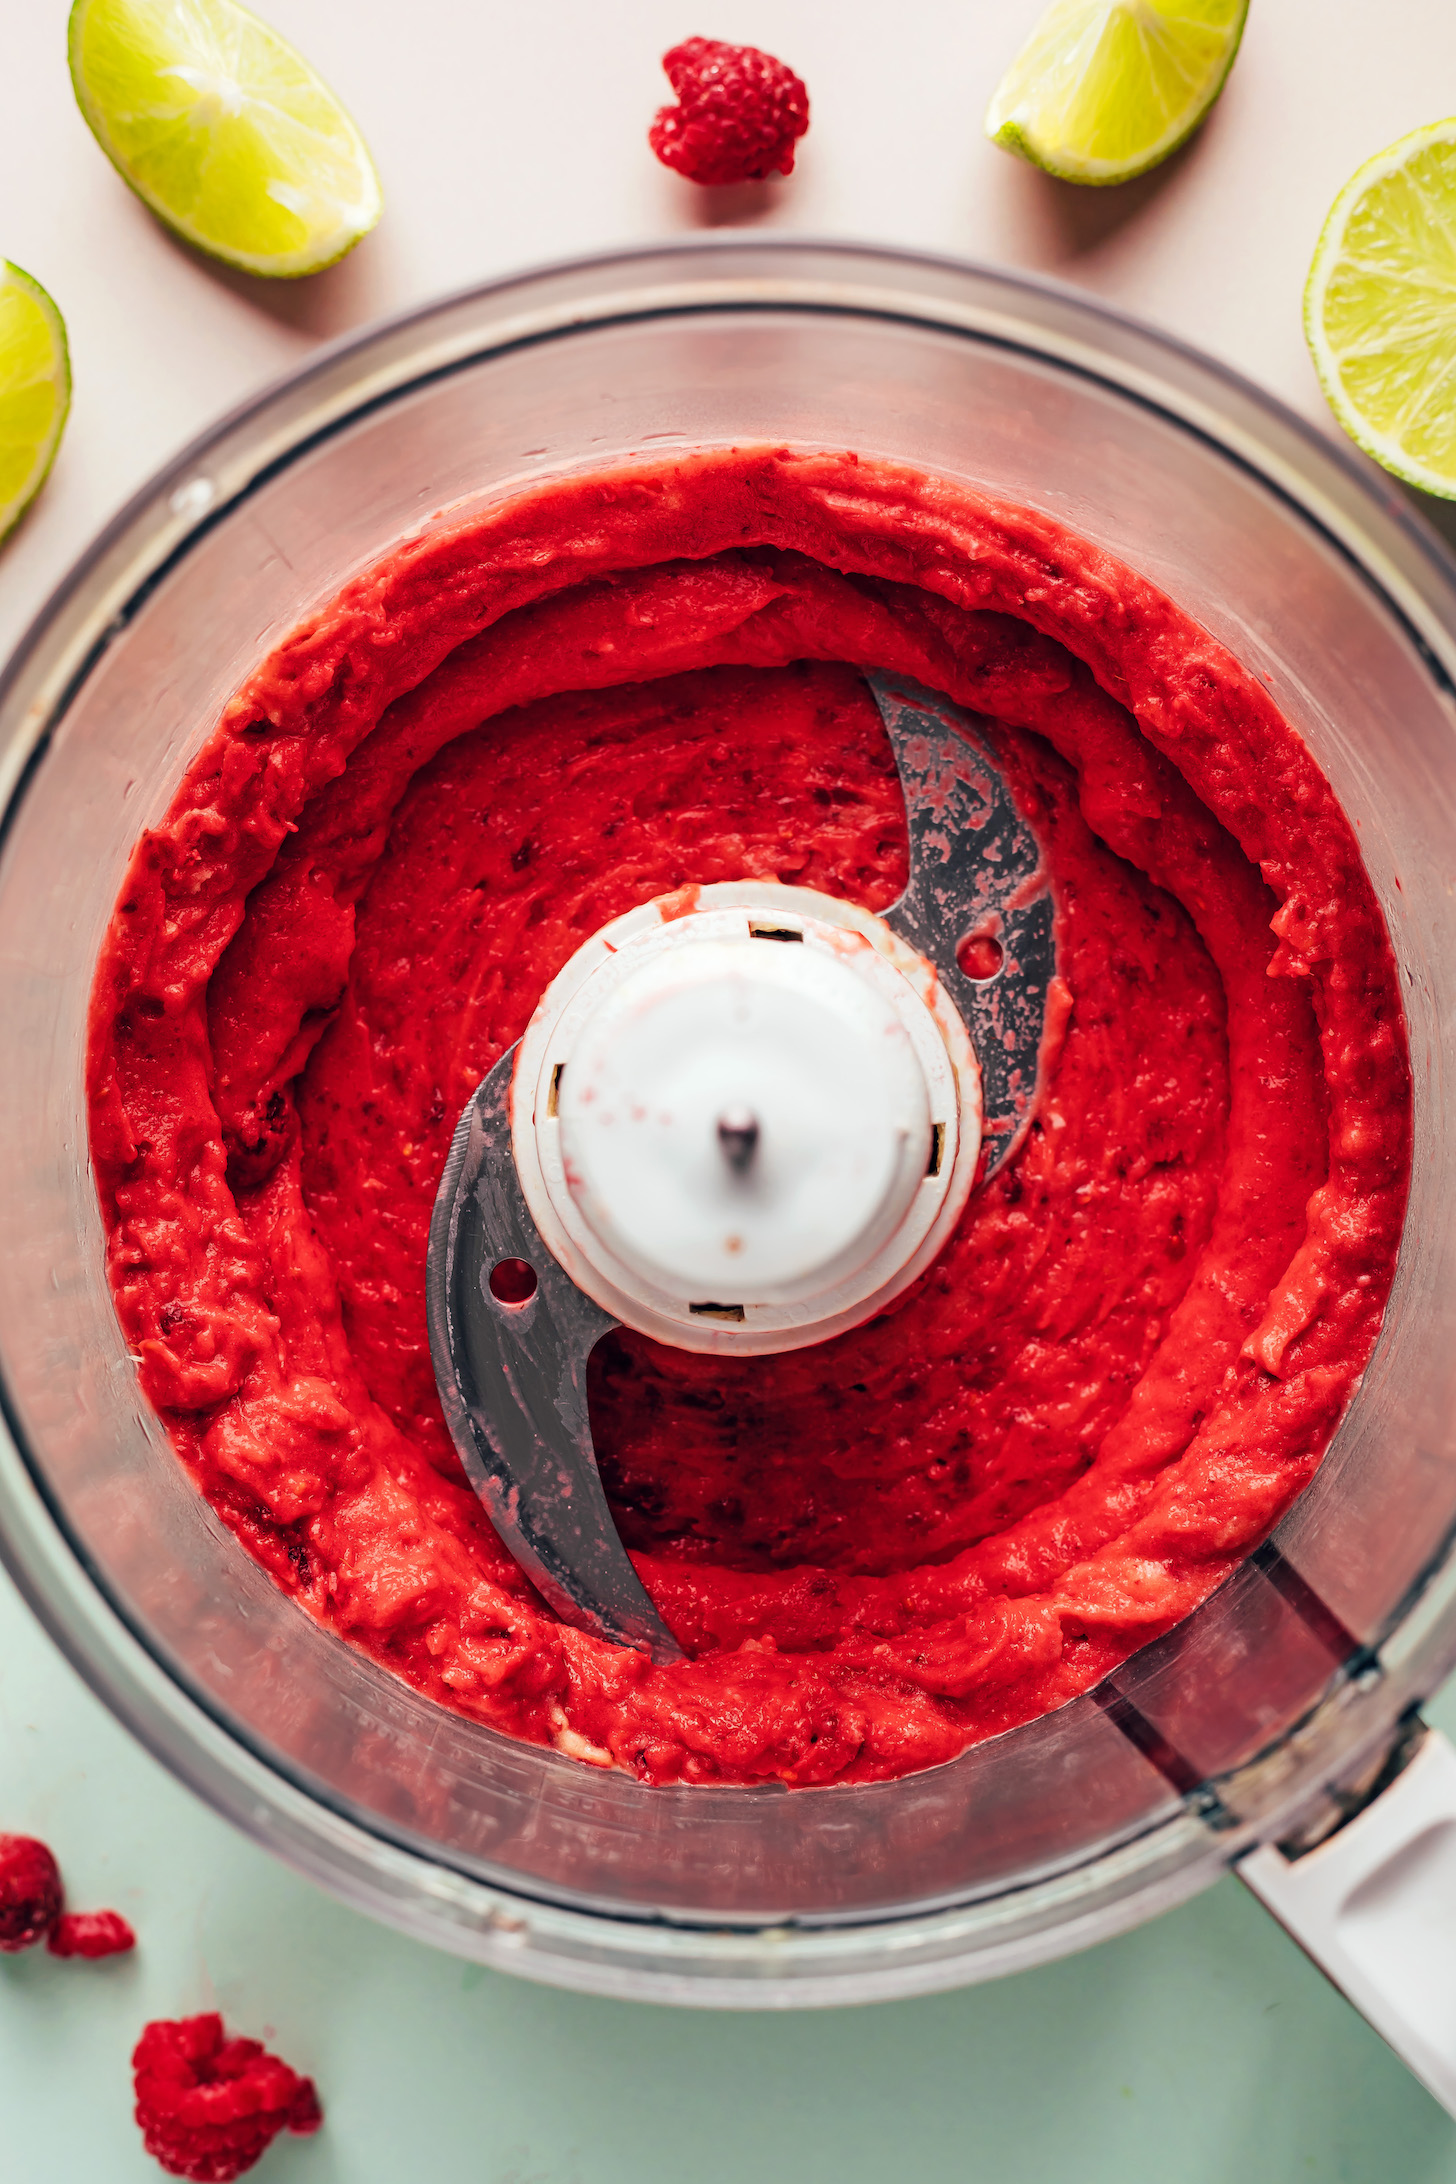 Blended raspberry, pineapple, and mango mixture in a food processor